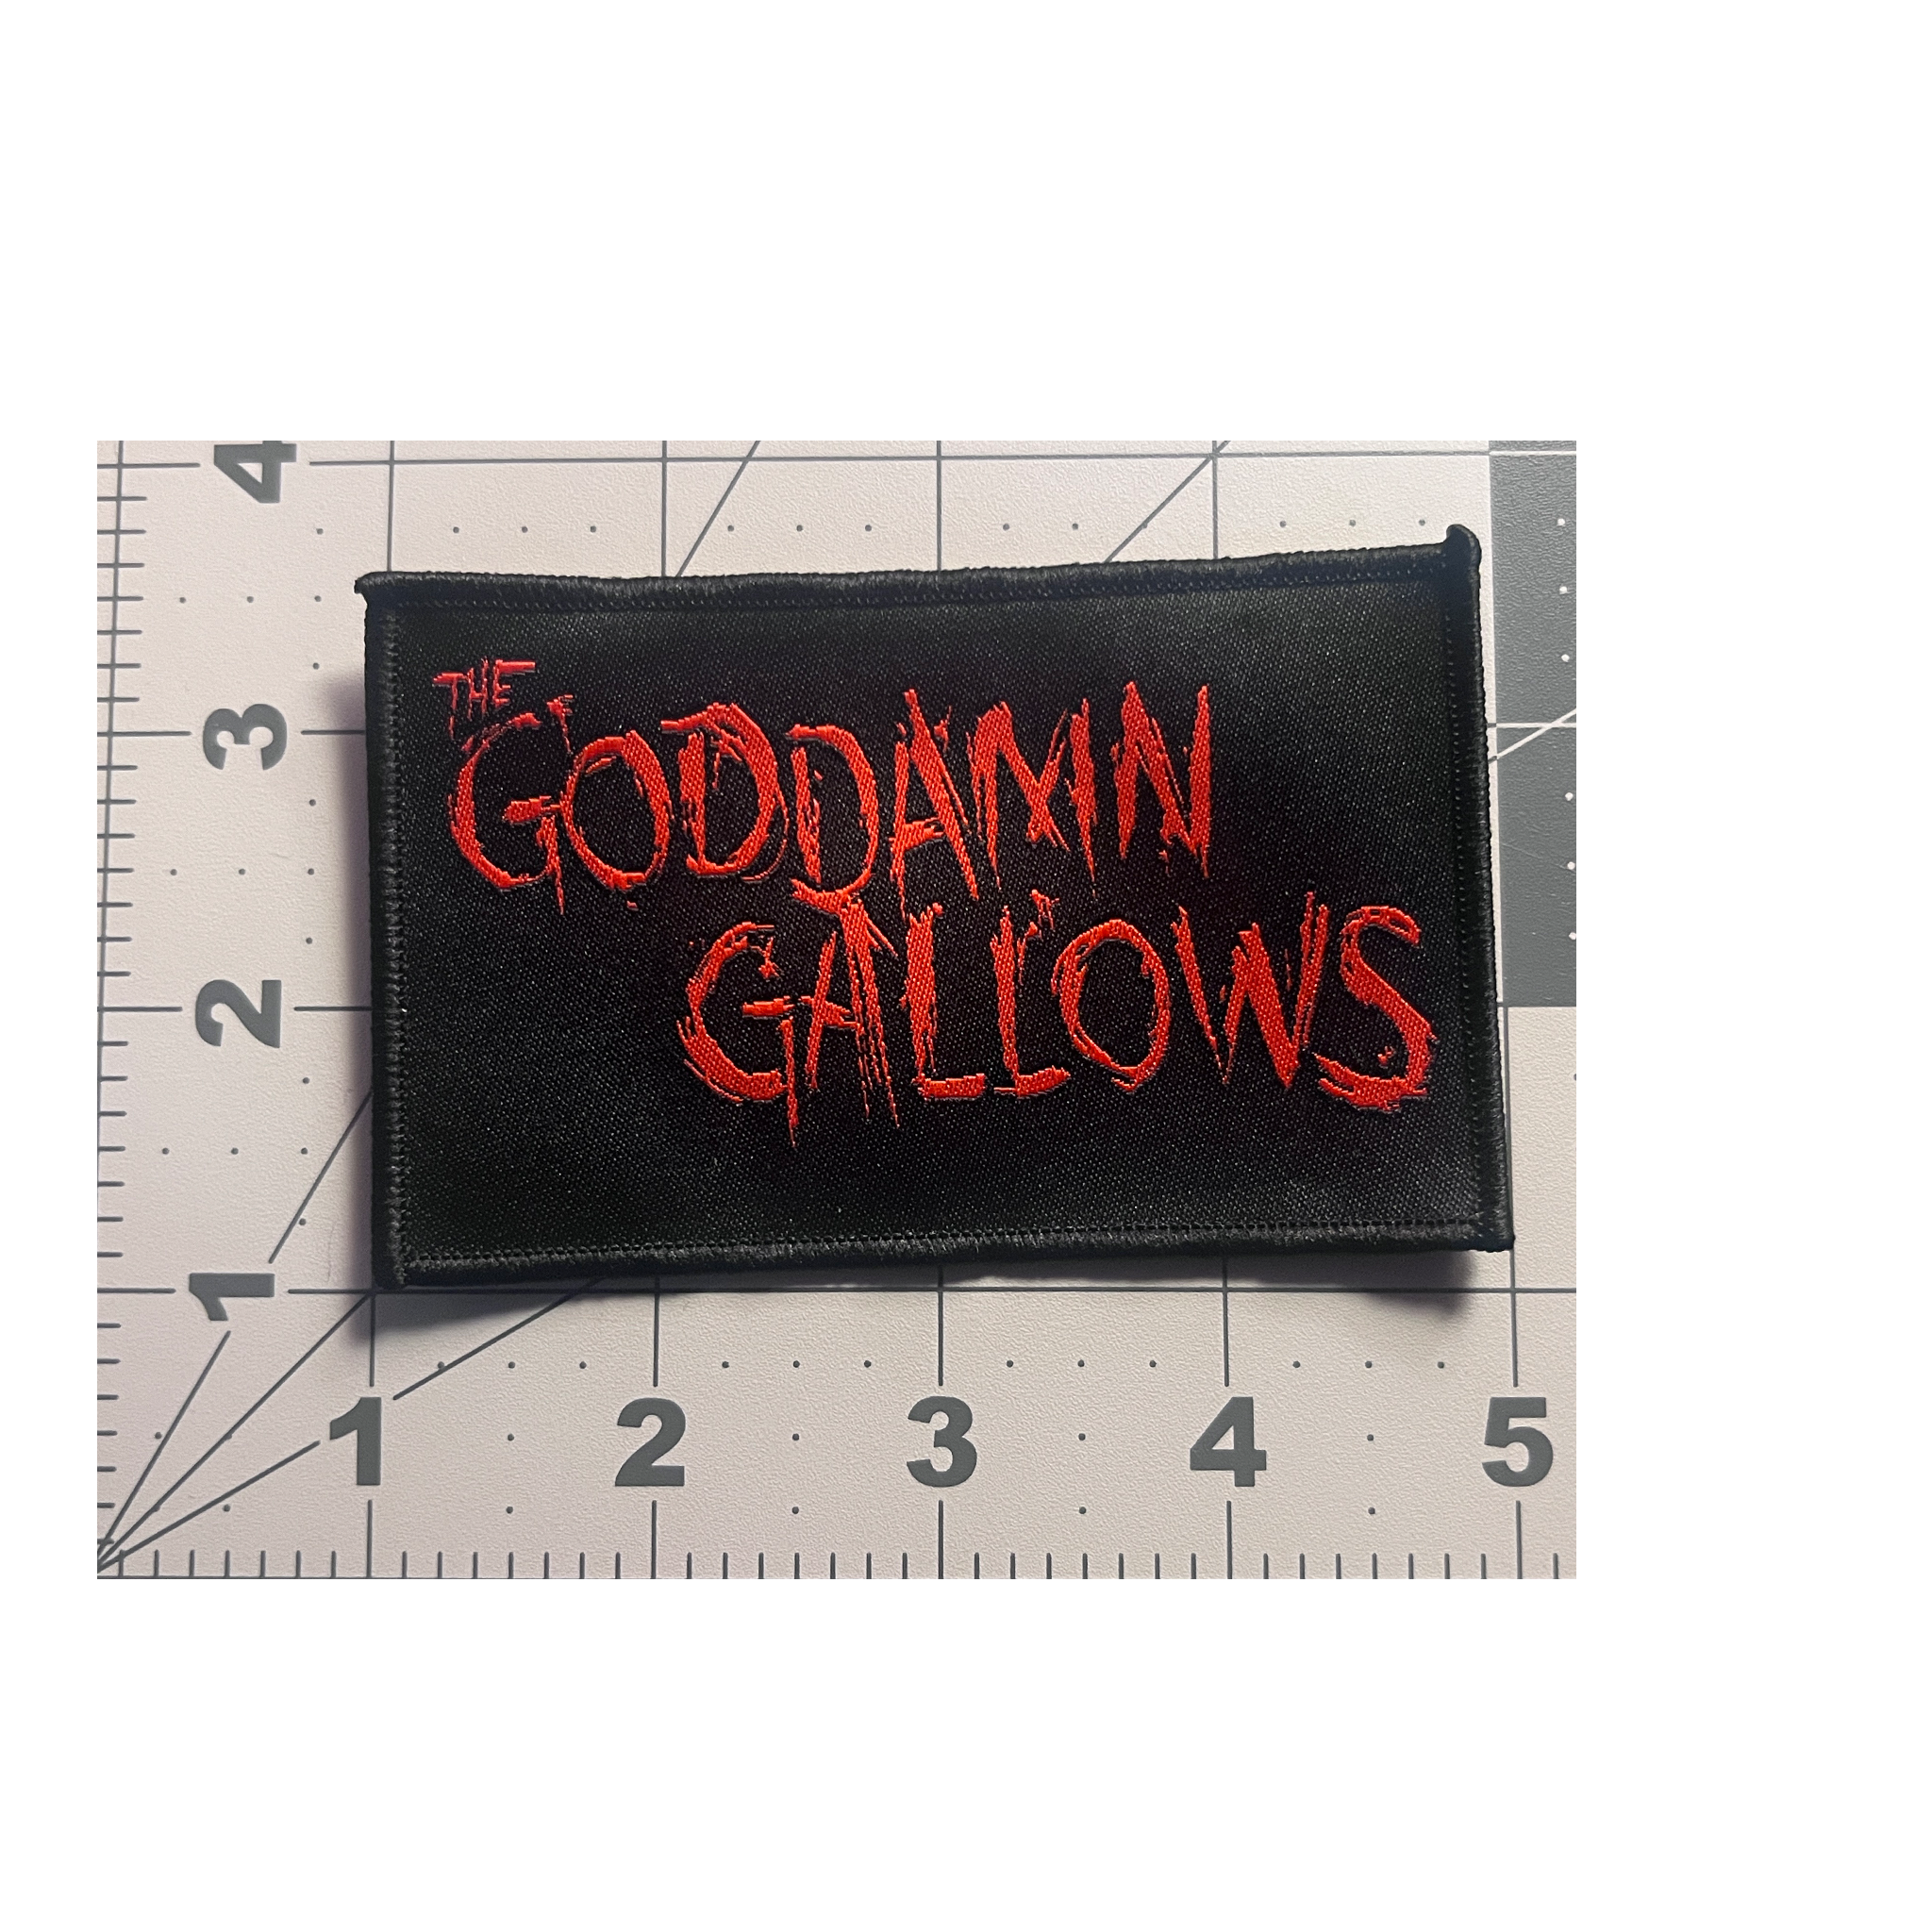 Goddamn Gallows Embroidered Patches